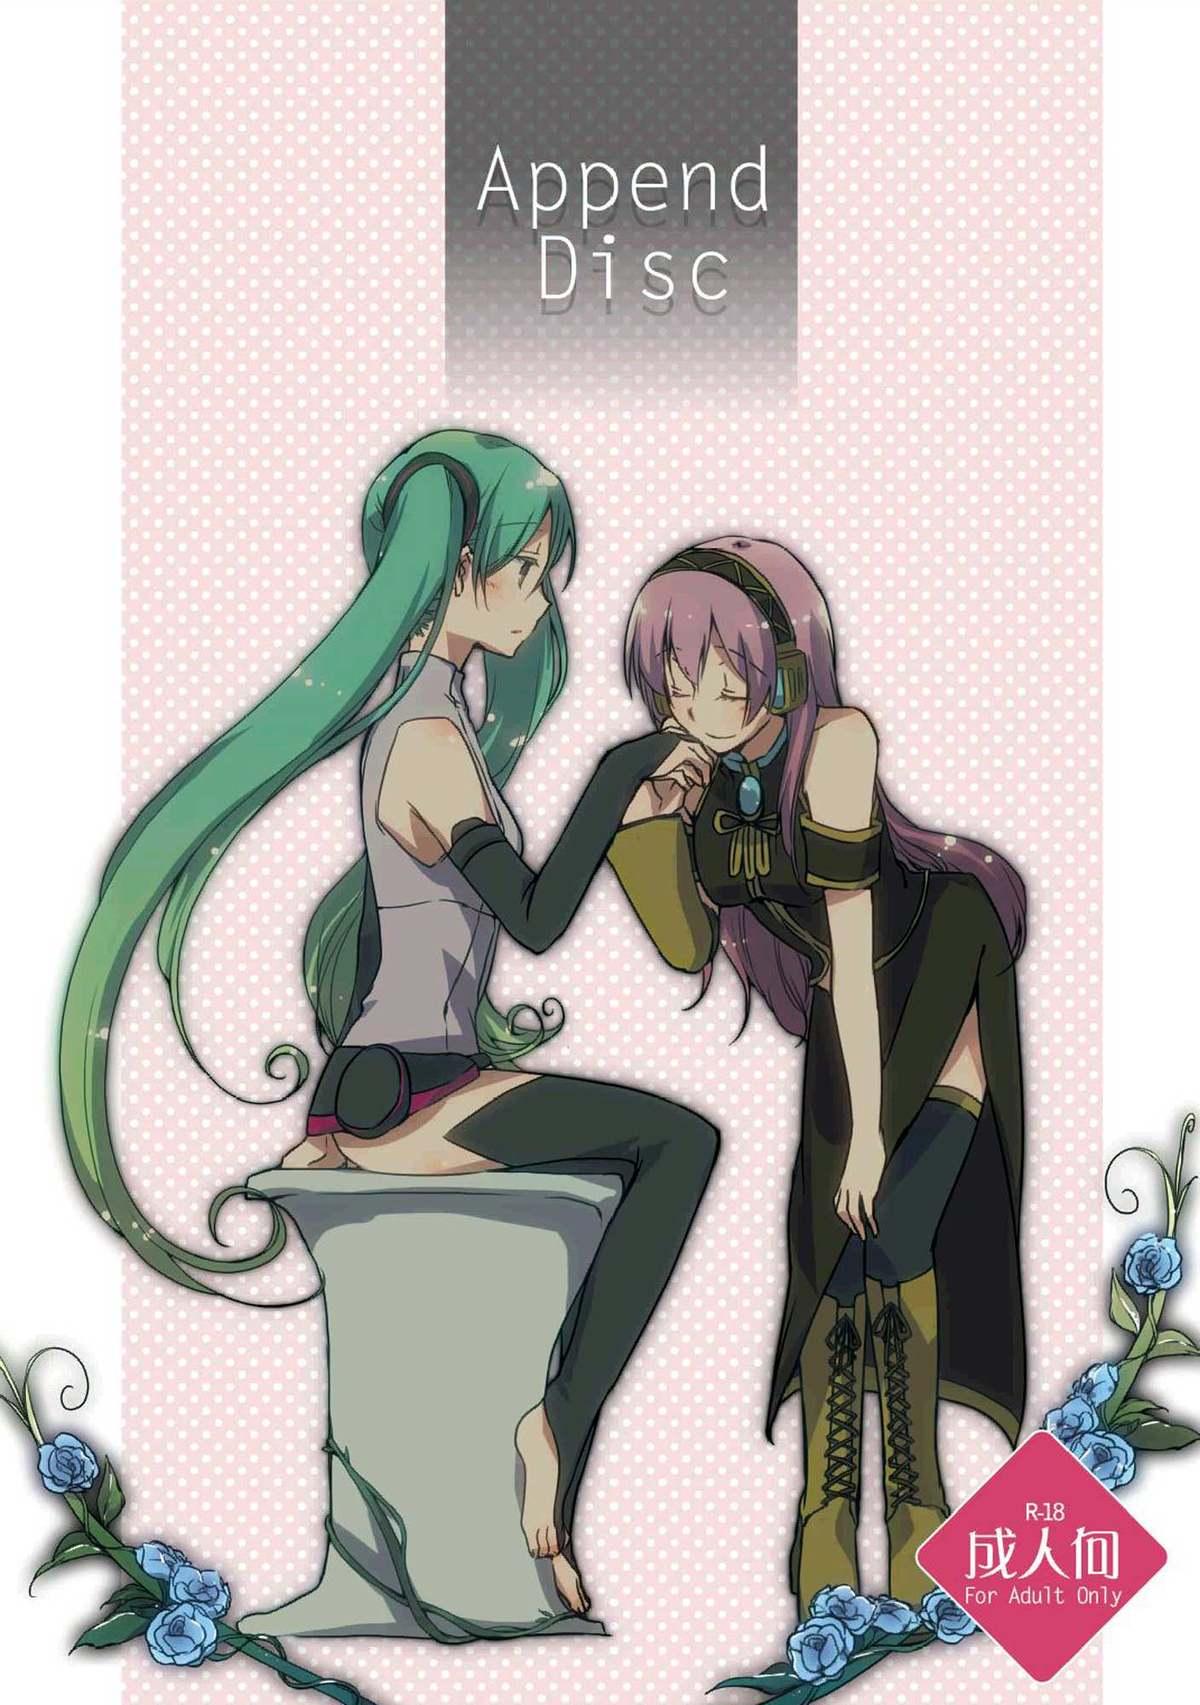 Game Append Disc - Vocaloid Periscope - Picture 1